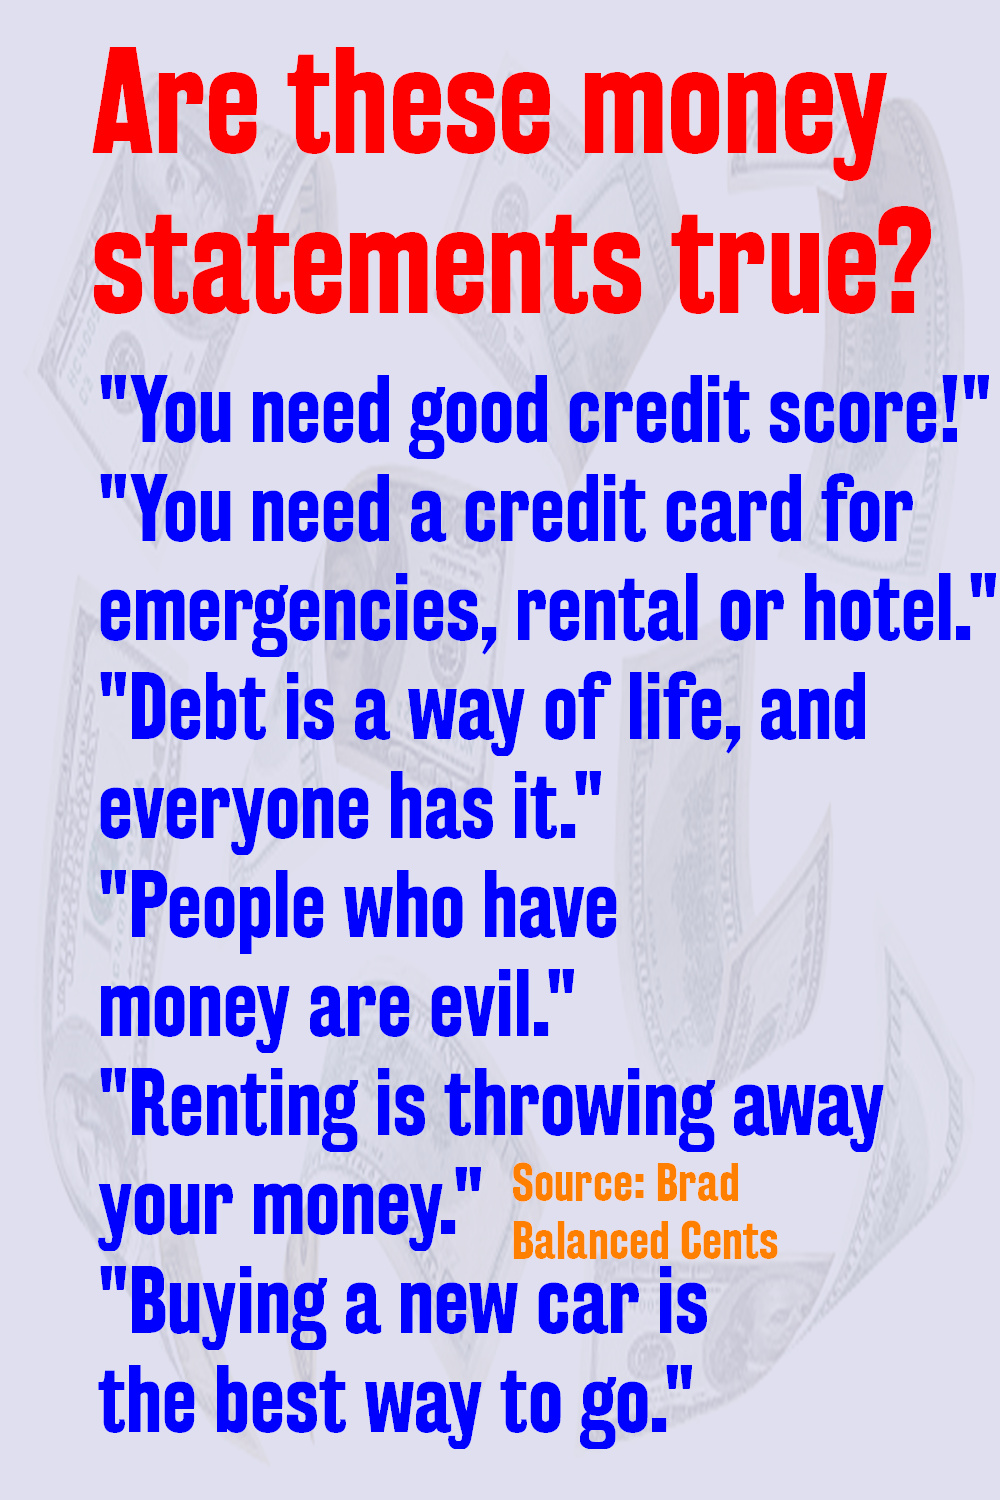 are these money statements true Just crawl outta debt FAST